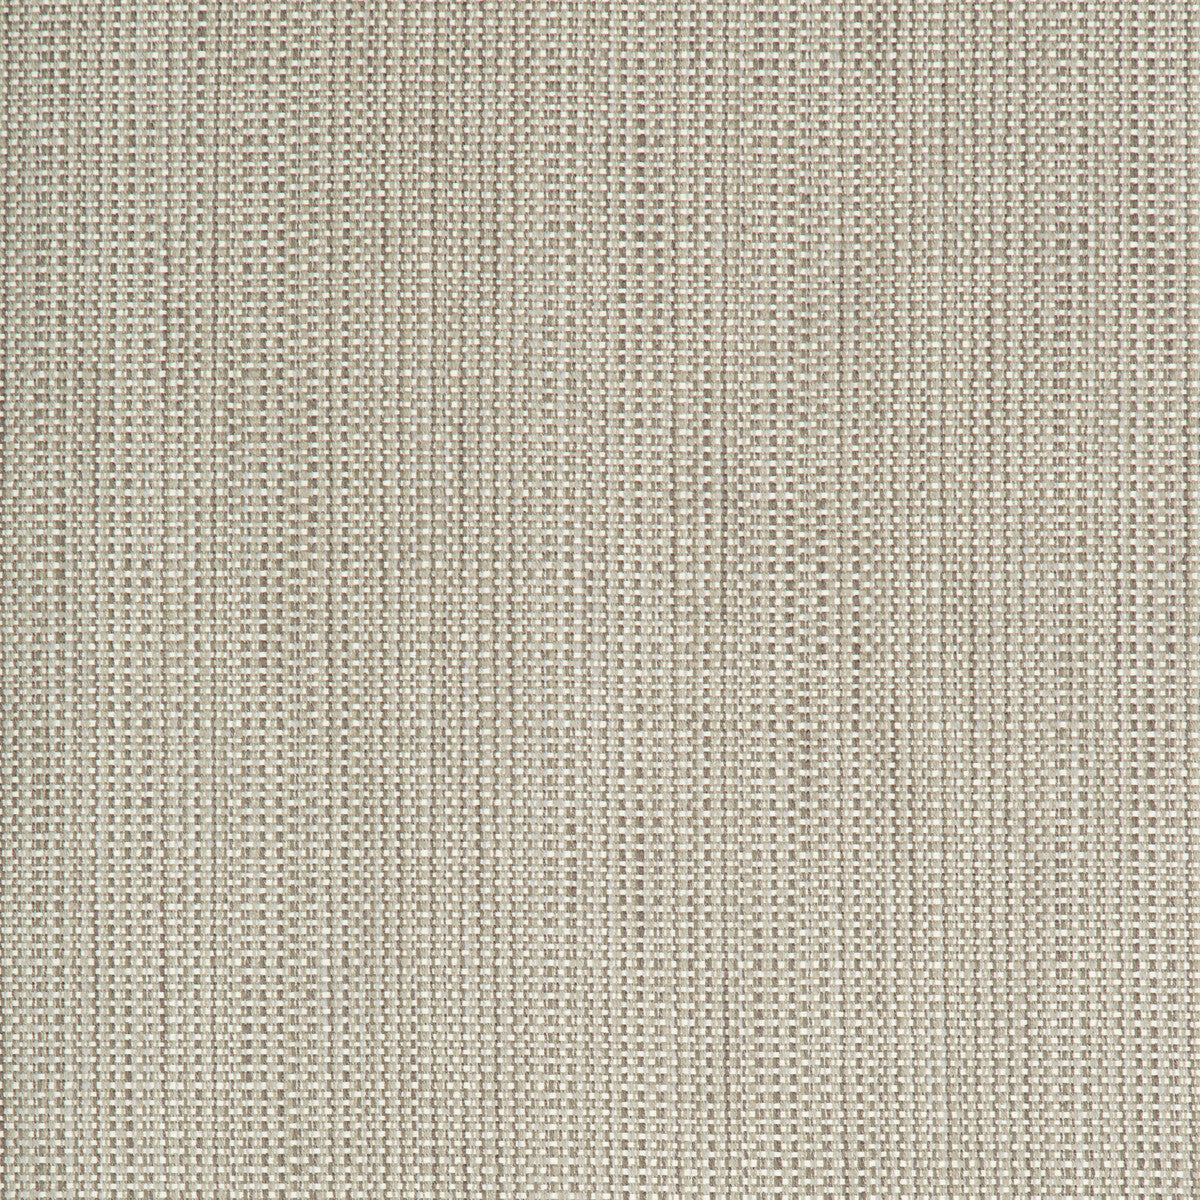 Kravet Contract fabric in 34634-11 color - pattern 34634.11.0 - by Kravet Contract in the Crypton Incase collection